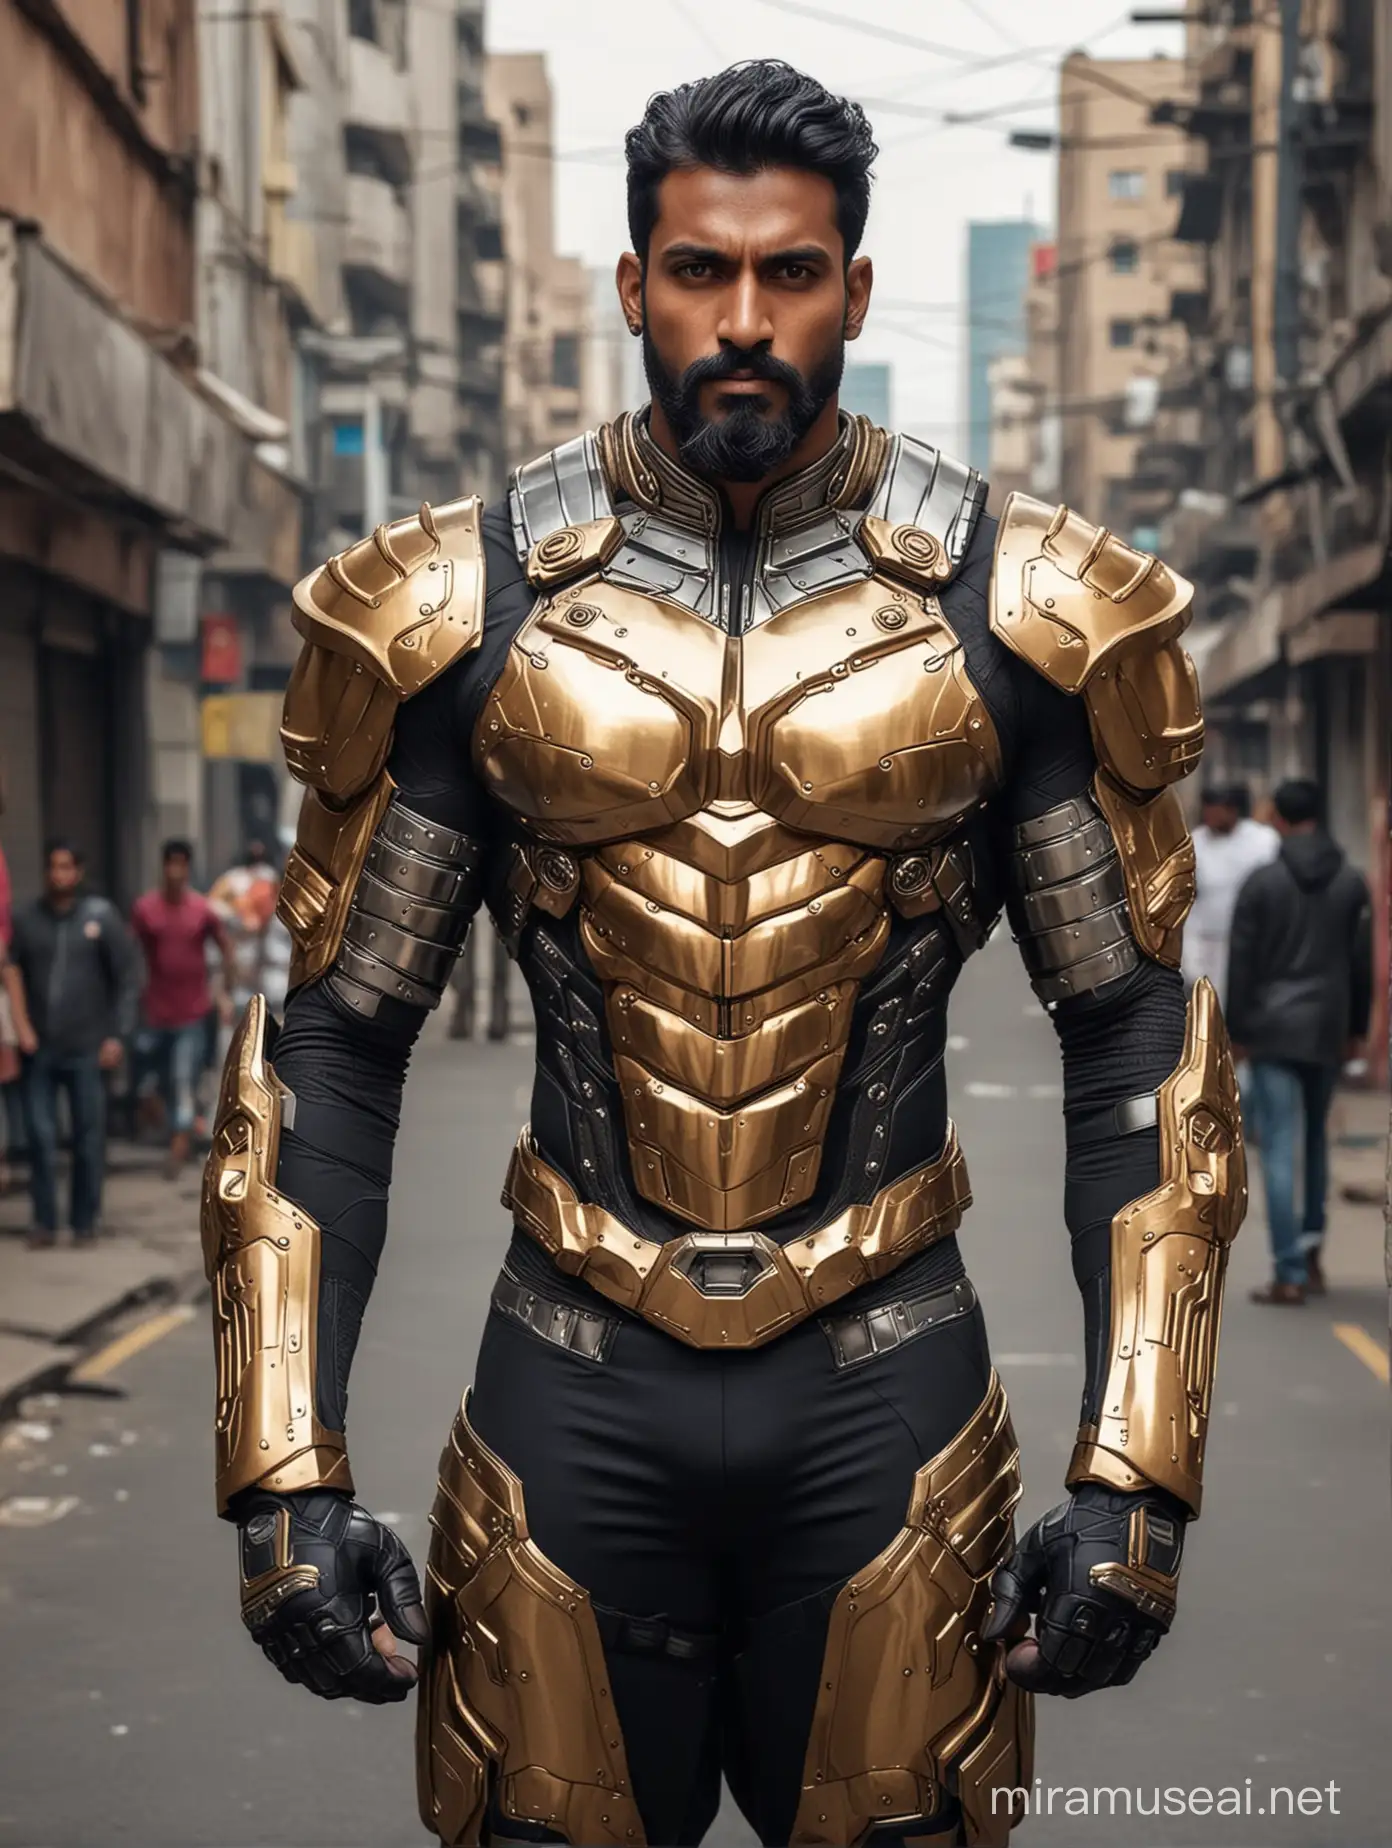 Tall and handsome bodybuilder Indian men with beautiful hairstyle and beard with attractive eyes and Broad shoulder and chest in sci-fi High Tech golden, sliver and black armour suit with firearms standing on street 